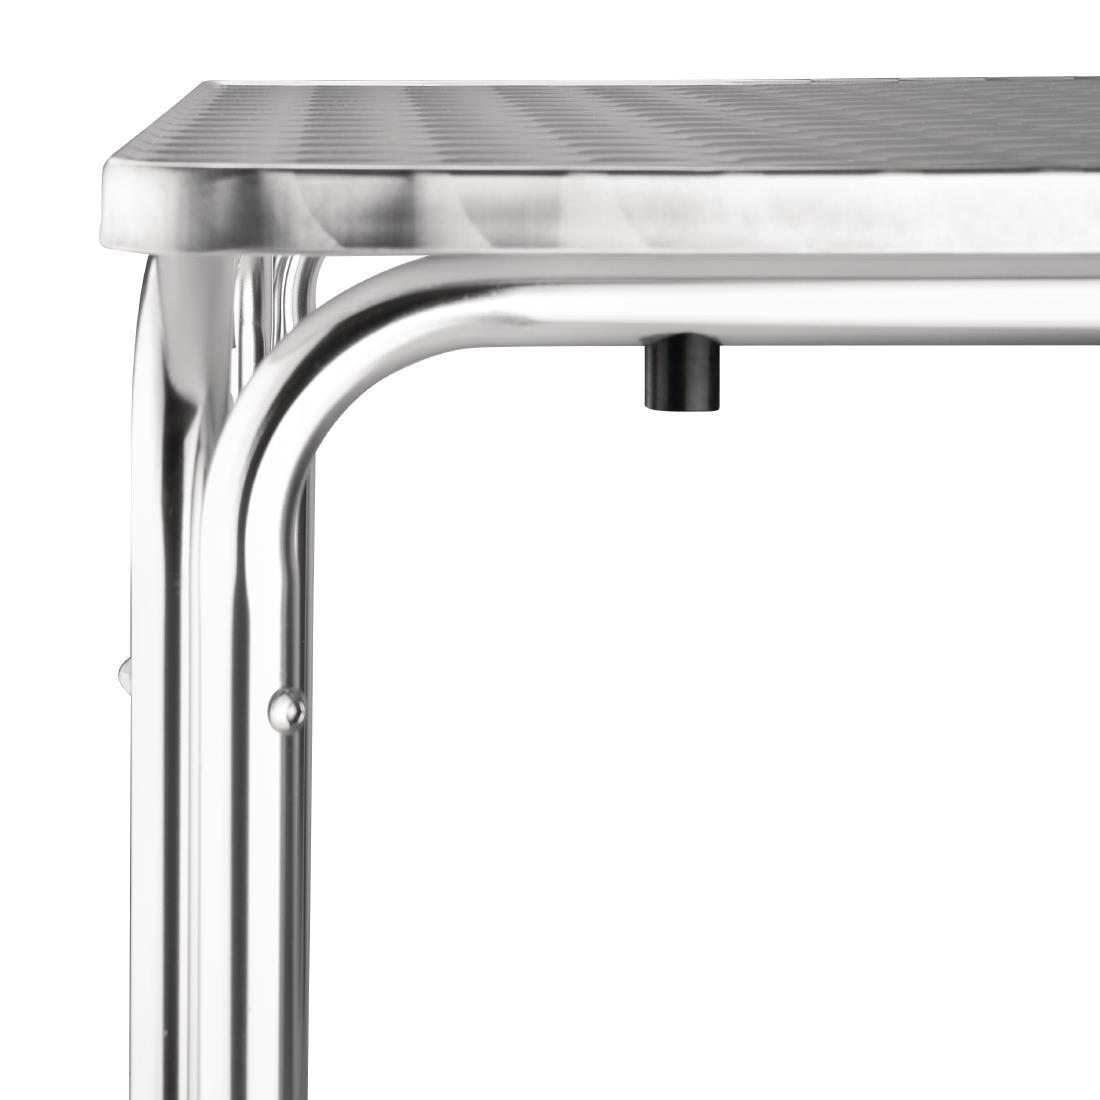 Bolero Square Stacking Table Stainless Steel 700mm - U505  - 3